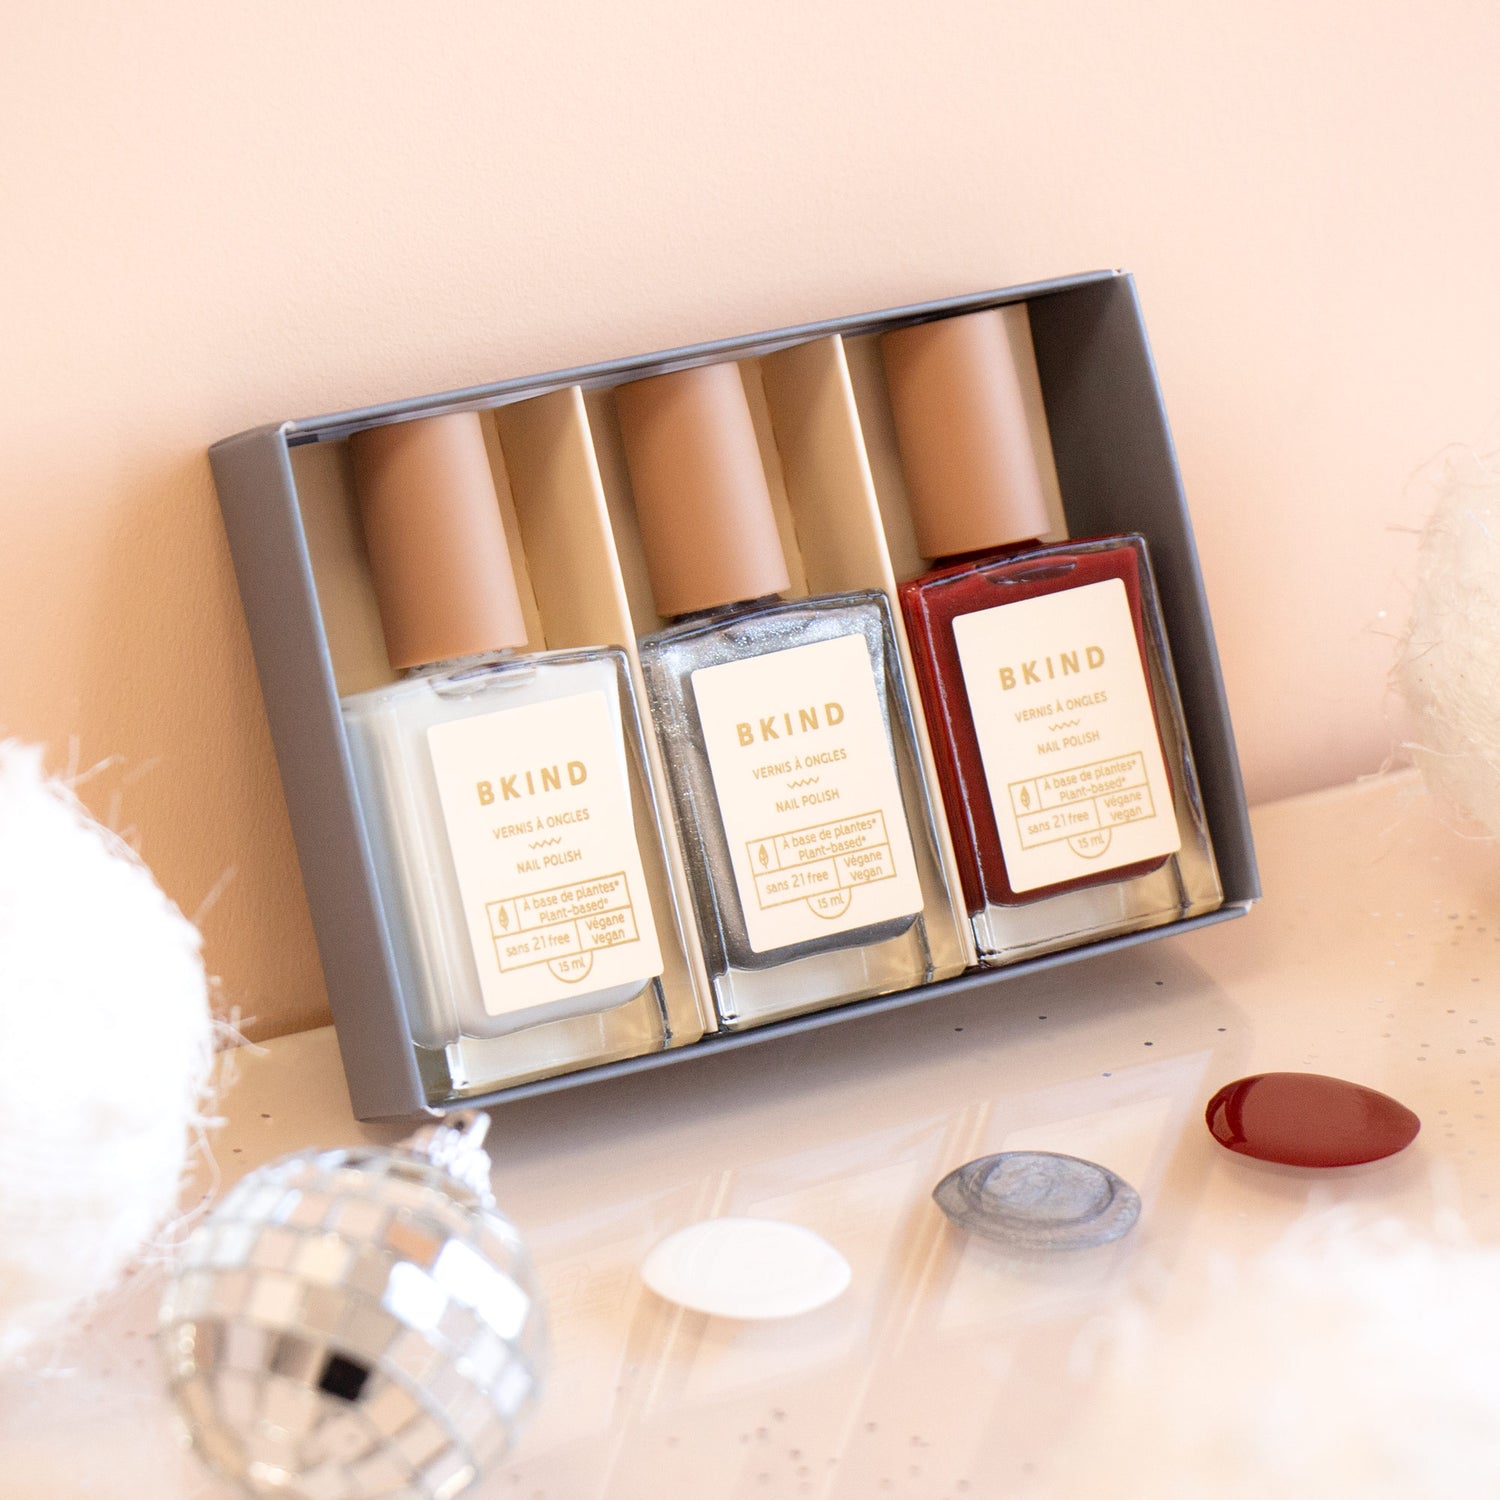 The Holiday essentials - Nail Polish Collection